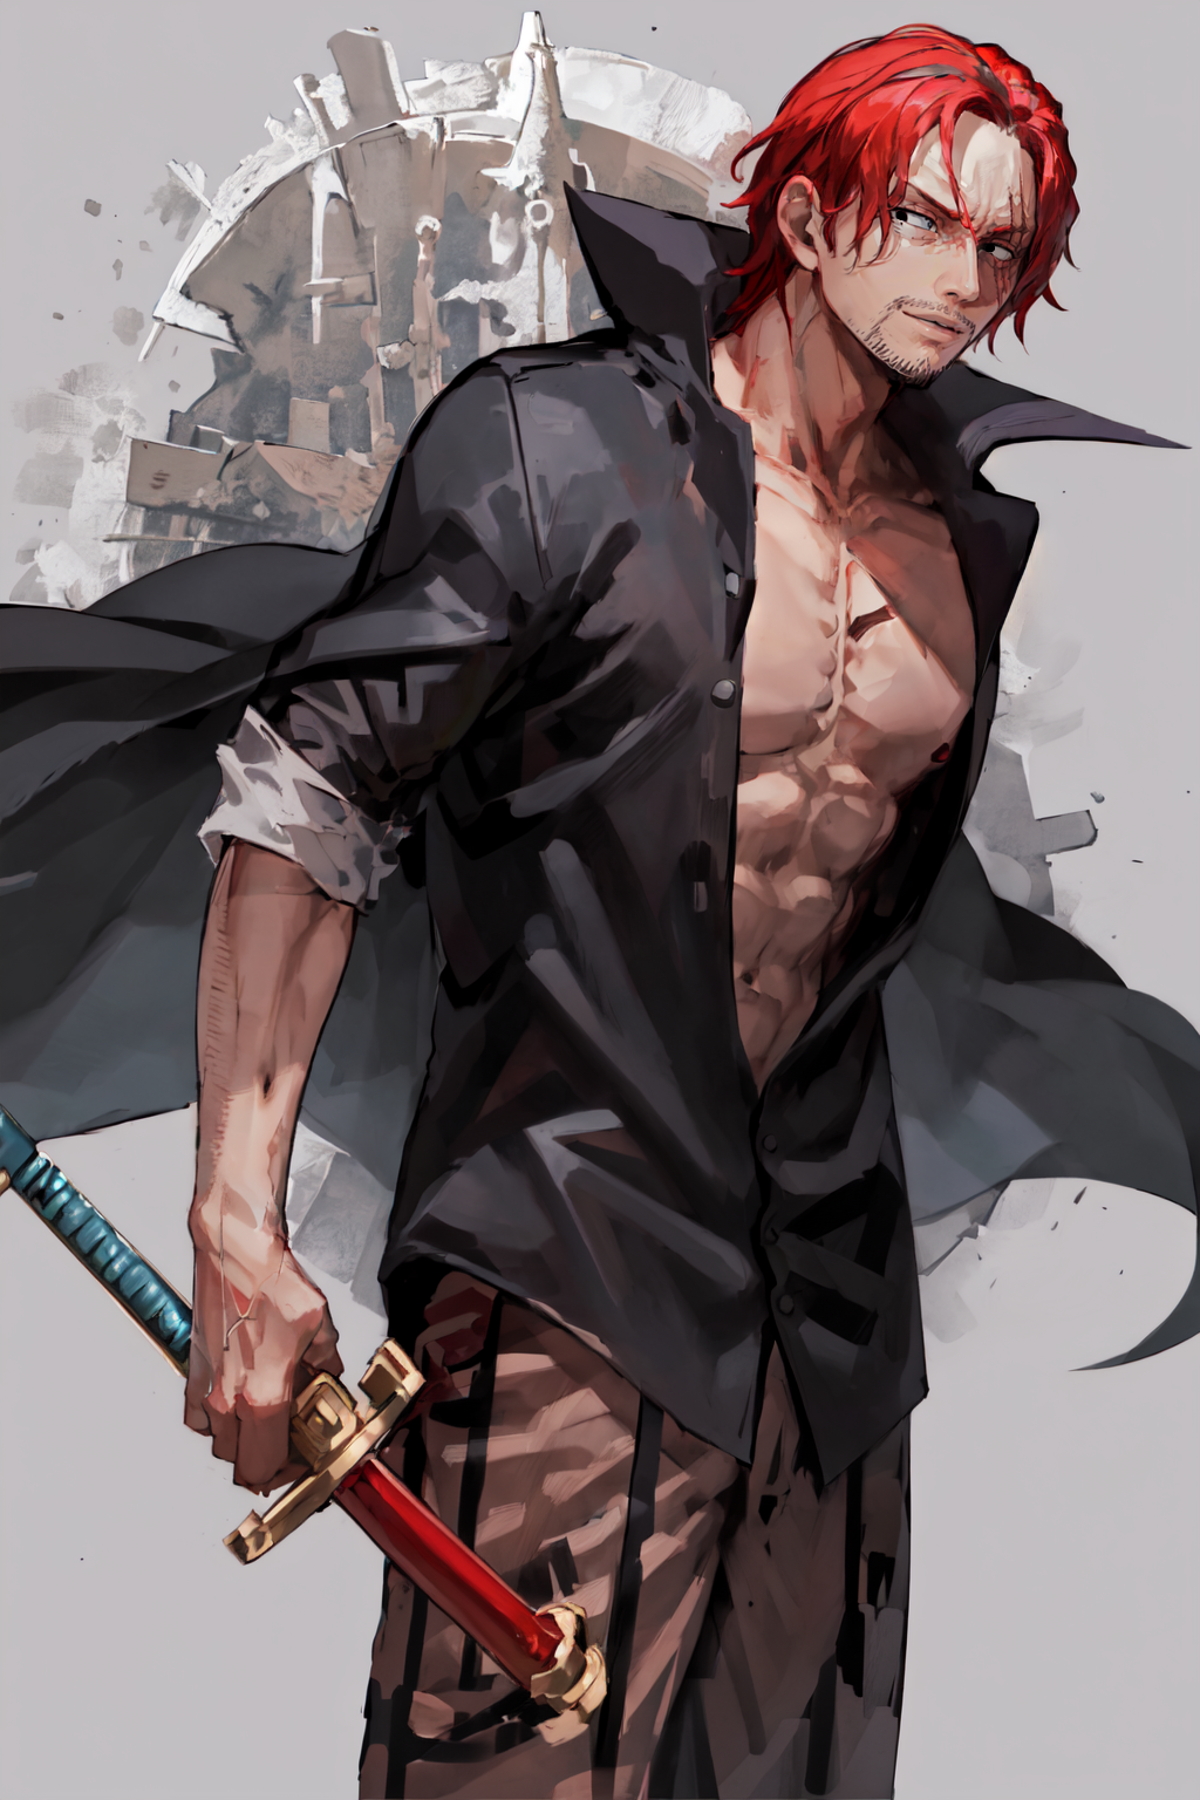 Shanks | One Piece image by Cooler_Rider